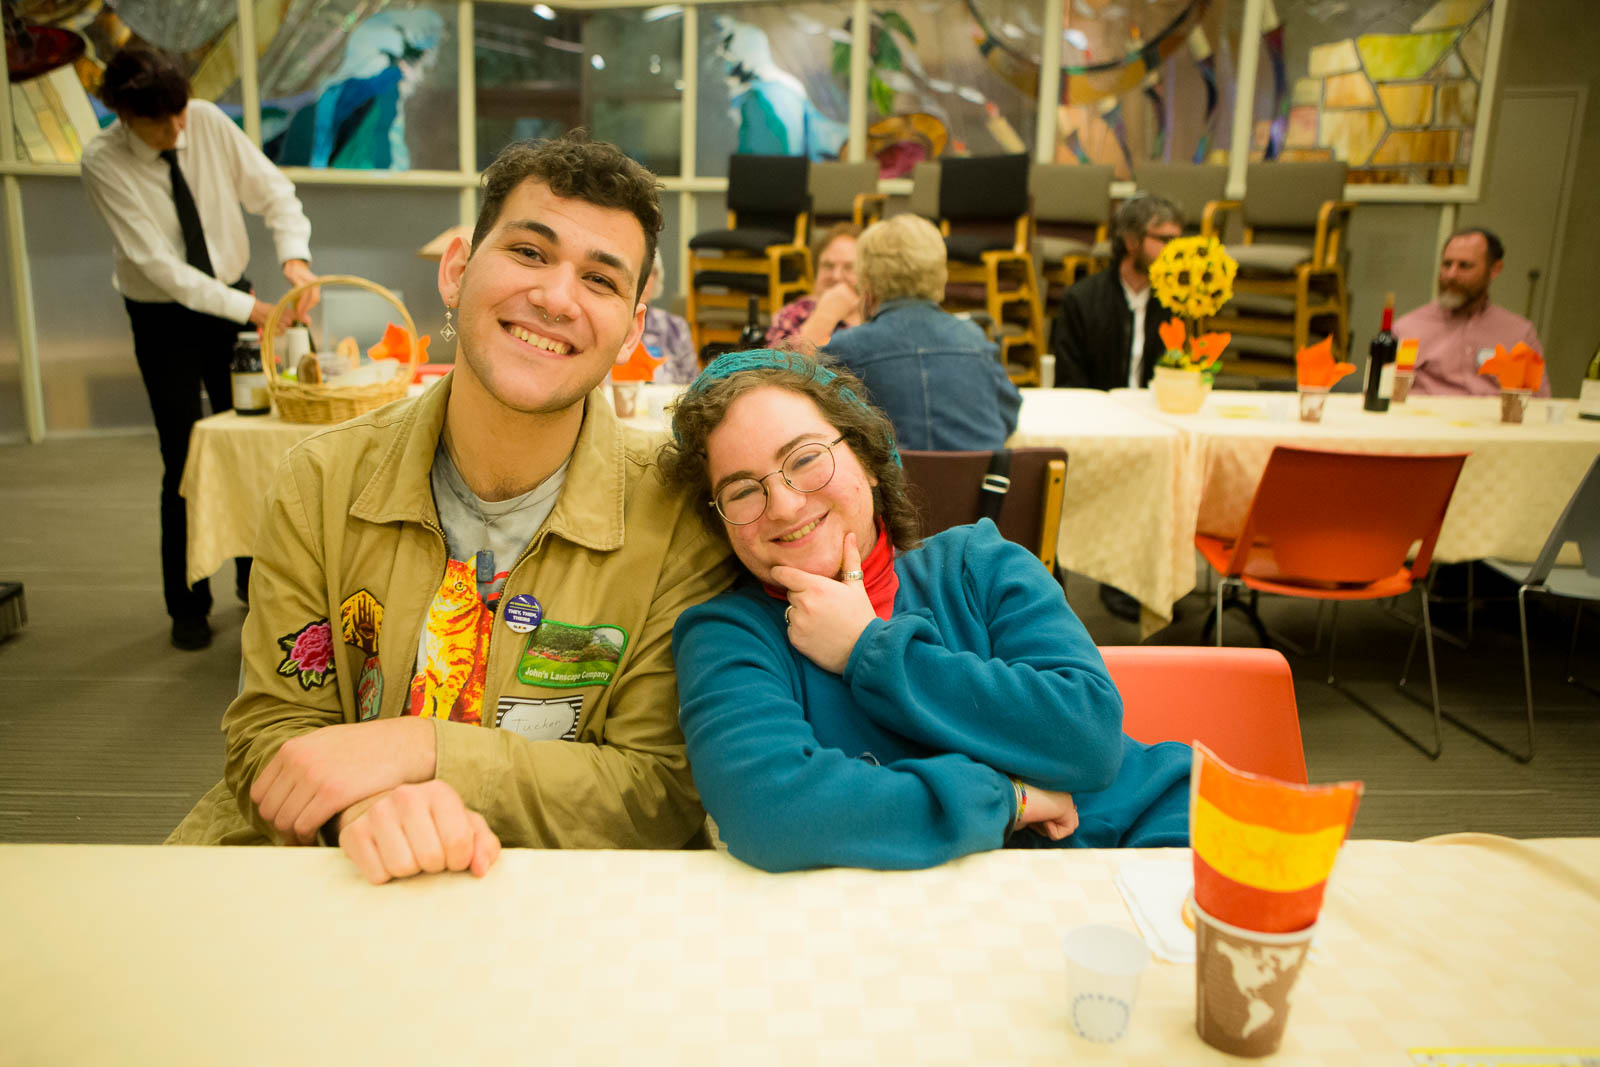 A young man and woman smiling at a table, with other tables of people in the background.